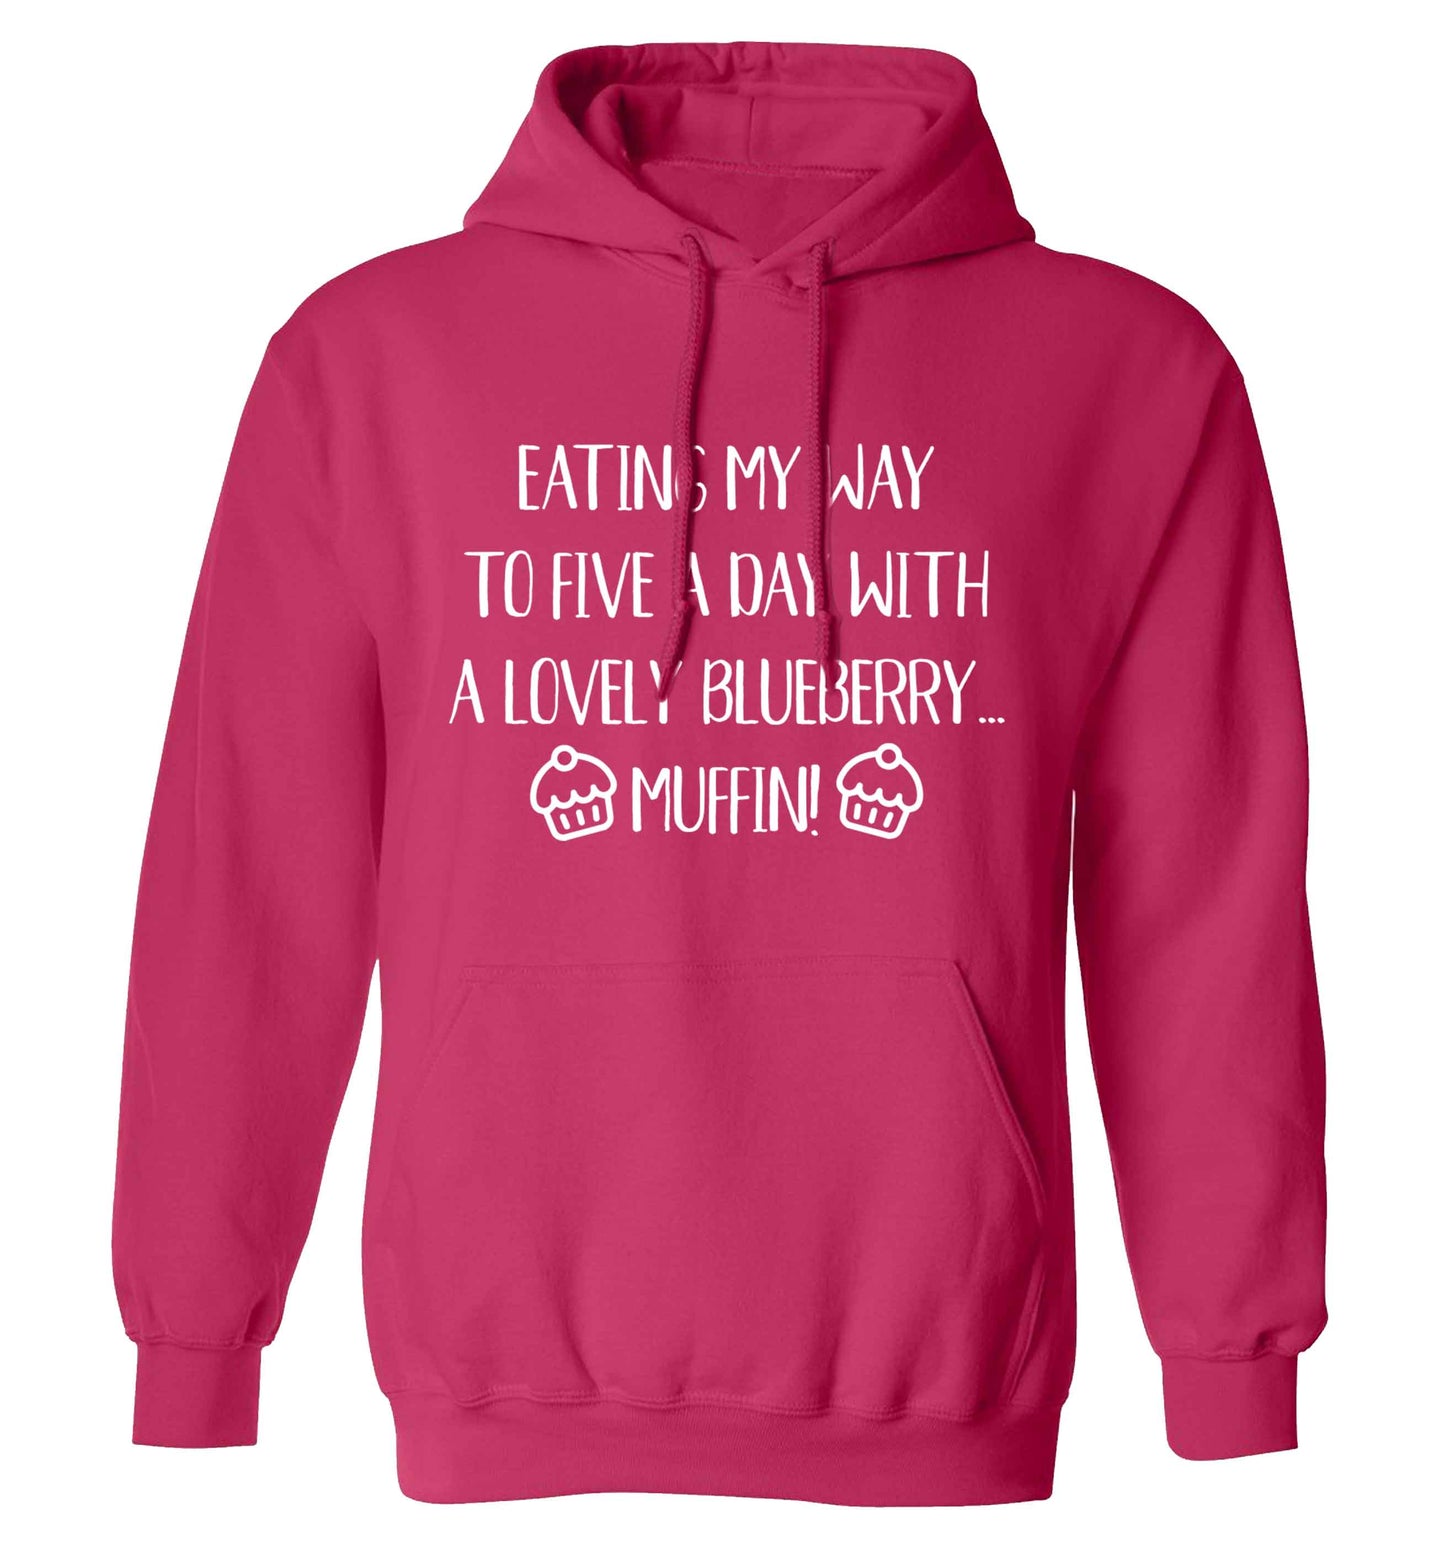 Eating my way to five a day with a lovely blueberry muffin adults unisex pink hoodie 2XL